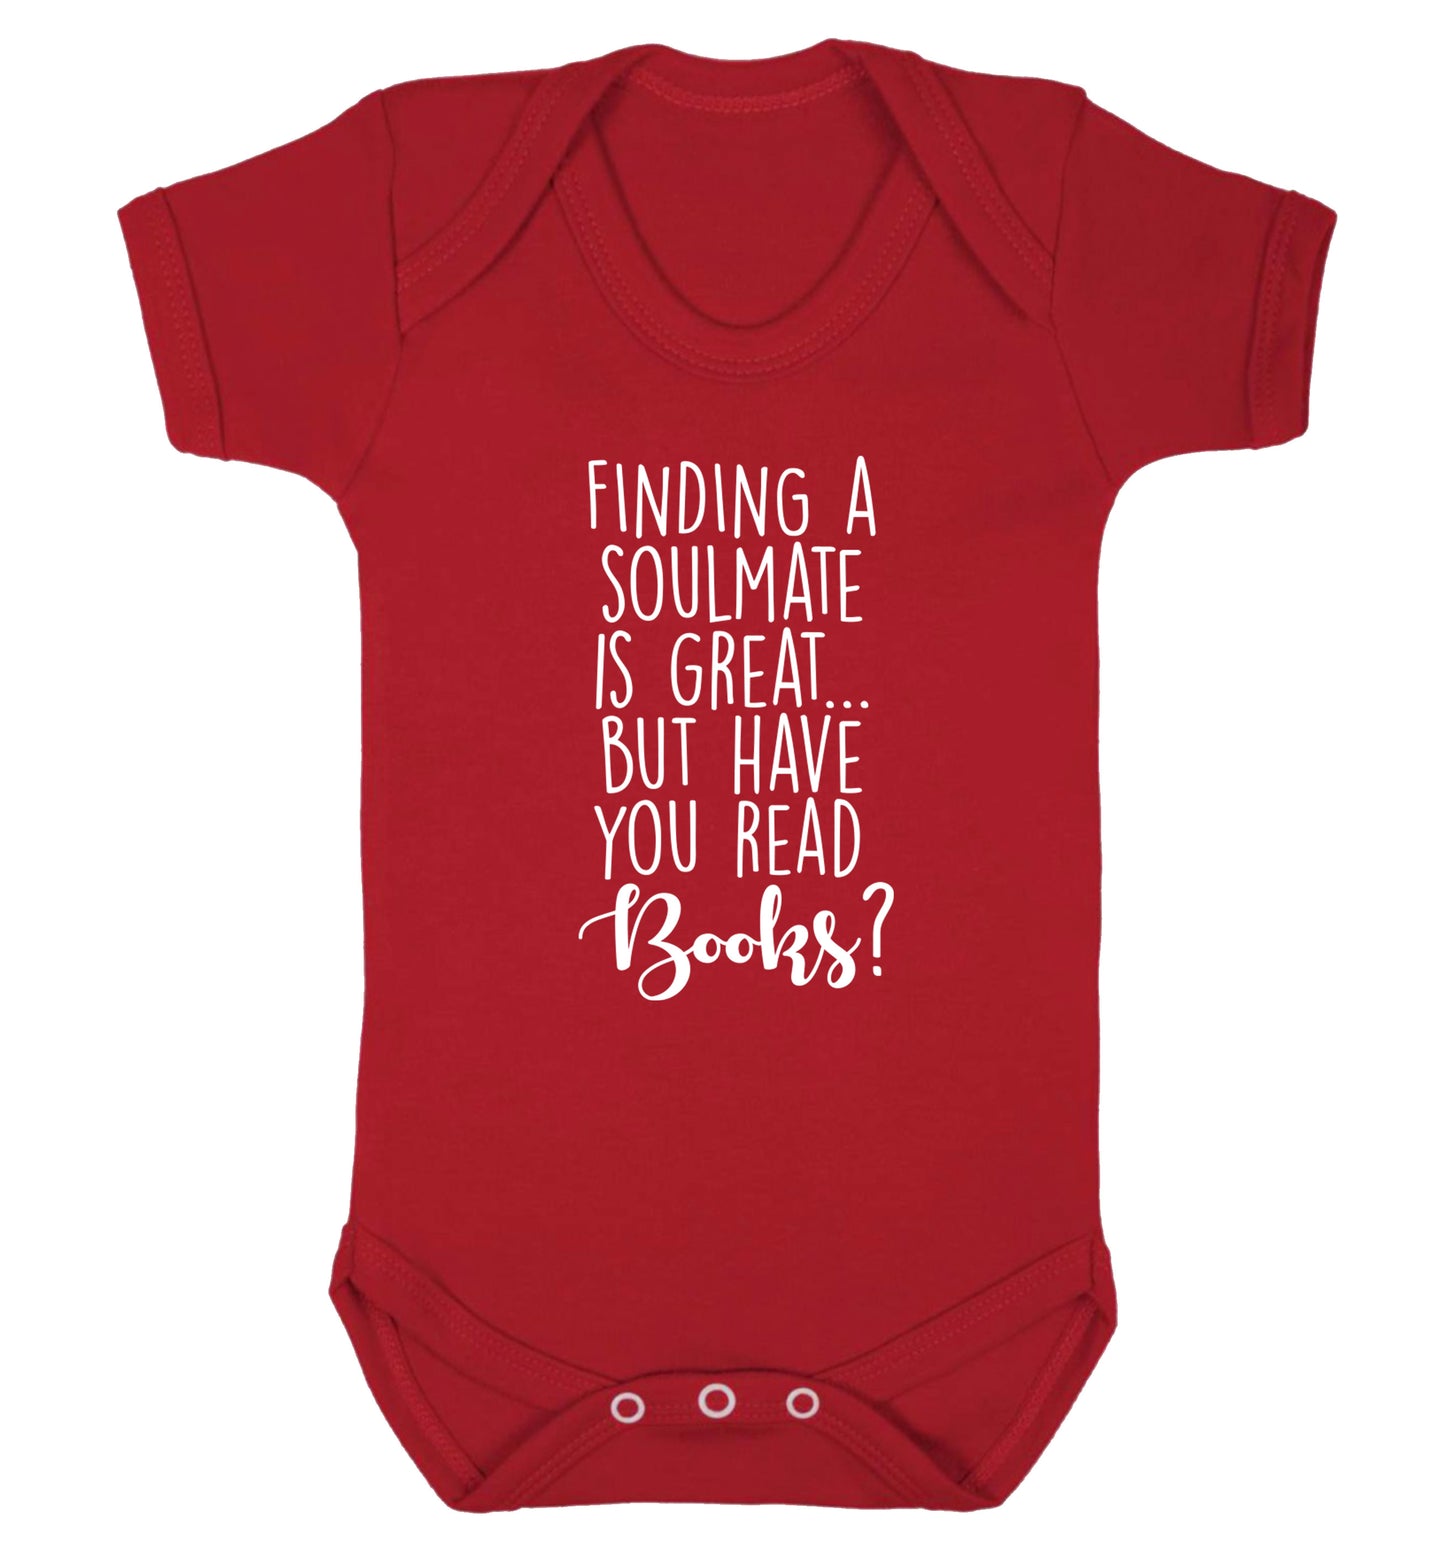 Finding a soulmate is great but have you read books? Baby Vest red 18-24 months